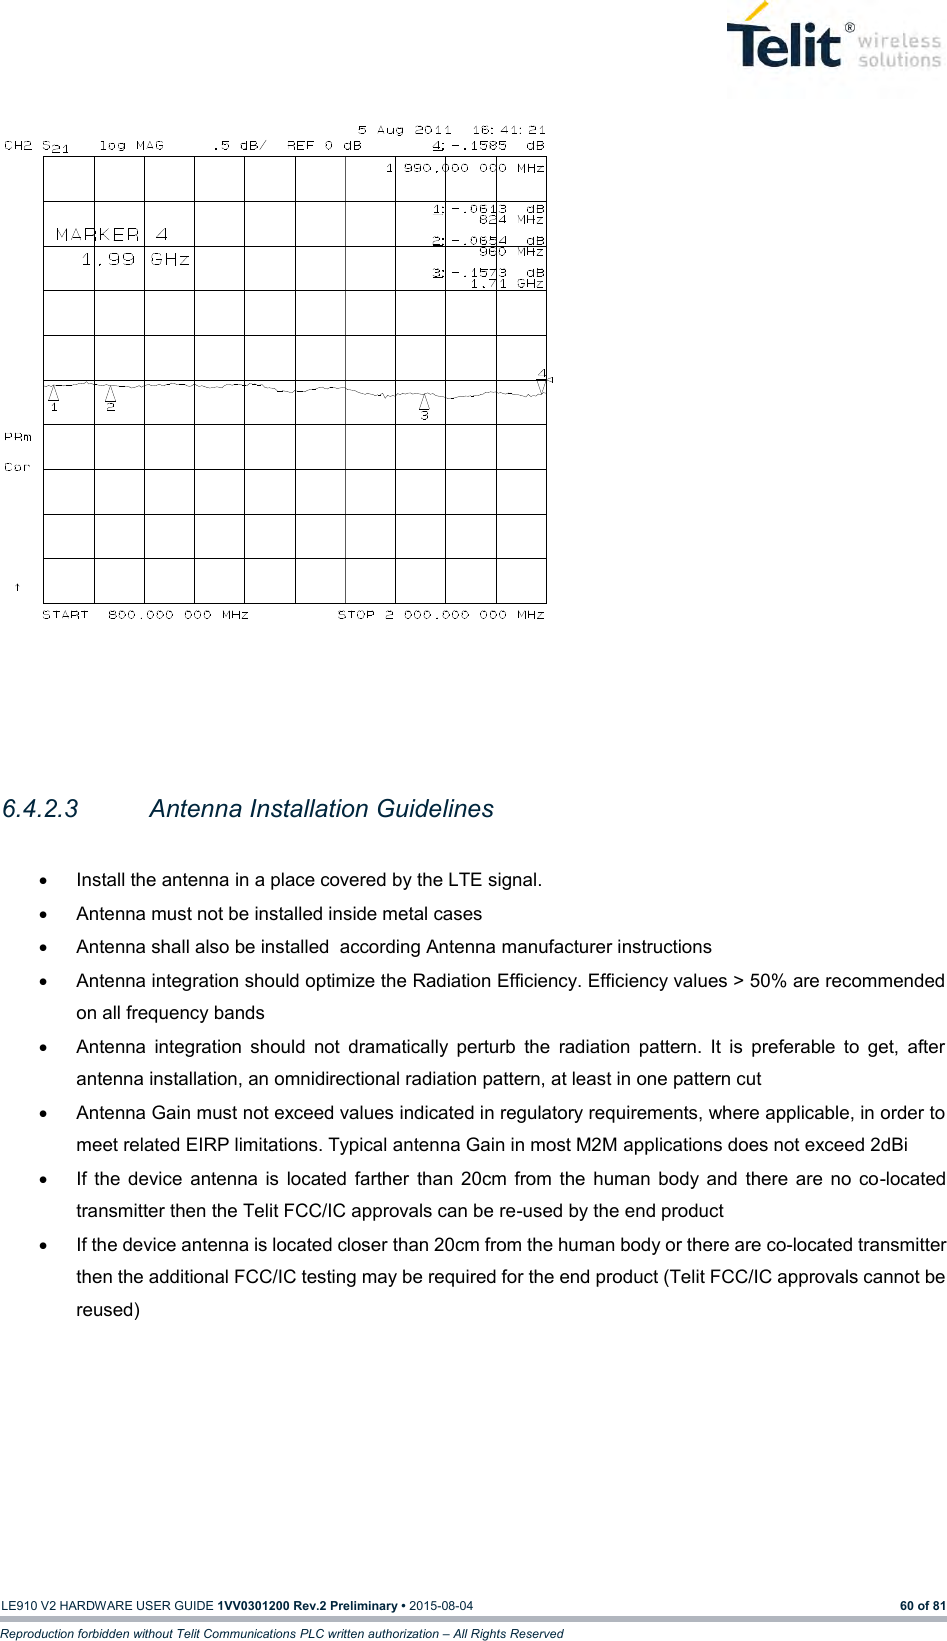   LE910 V2 HARDWARE USER GUIDE 1VV0301200 Rev.2 Preliminary • 2015-08-04 60 of 81 Reproduction forbidden without Telit Communications PLC written authorization – All Rights Reserved                   6.4.2.3  Antenna Installation Guidelines    Install the antenna in a place covered by the LTE signal.   Antenna must not be installed inside metal cases   Antenna shall also be installed  according Antenna manufacturer instructions   Antenna integration should optimize the Radiation Efficiency. Efficiency values &gt; 50% are recommended on all frequency bands   Antenna  integration  should  not  dramatically  perturb  the  radiation  pattern.  It  is  preferable  to  get,  after antenna installation, an omnidirectional radiation pattern, at least in one pattern cut   Antenna Gain must not exceed values indicated in regulatory requirements, where applicable, in order to meet related EIRP limitations. Typical antenna Gain in most M2M applications does not exceed 2dBi   If  the  device  antenna is  located  farther  than  20cm  from the  human  body  and  there  are no  co-located transmitter then the Telit FCC/IC approvals can be re-used by the end product   If the device antenna is located closer than 20cm from the human body or there are co-located transmitter then the additional FCC/IC testing may be required for the end product (Telit FCC/IC approvals cannot be reused)     